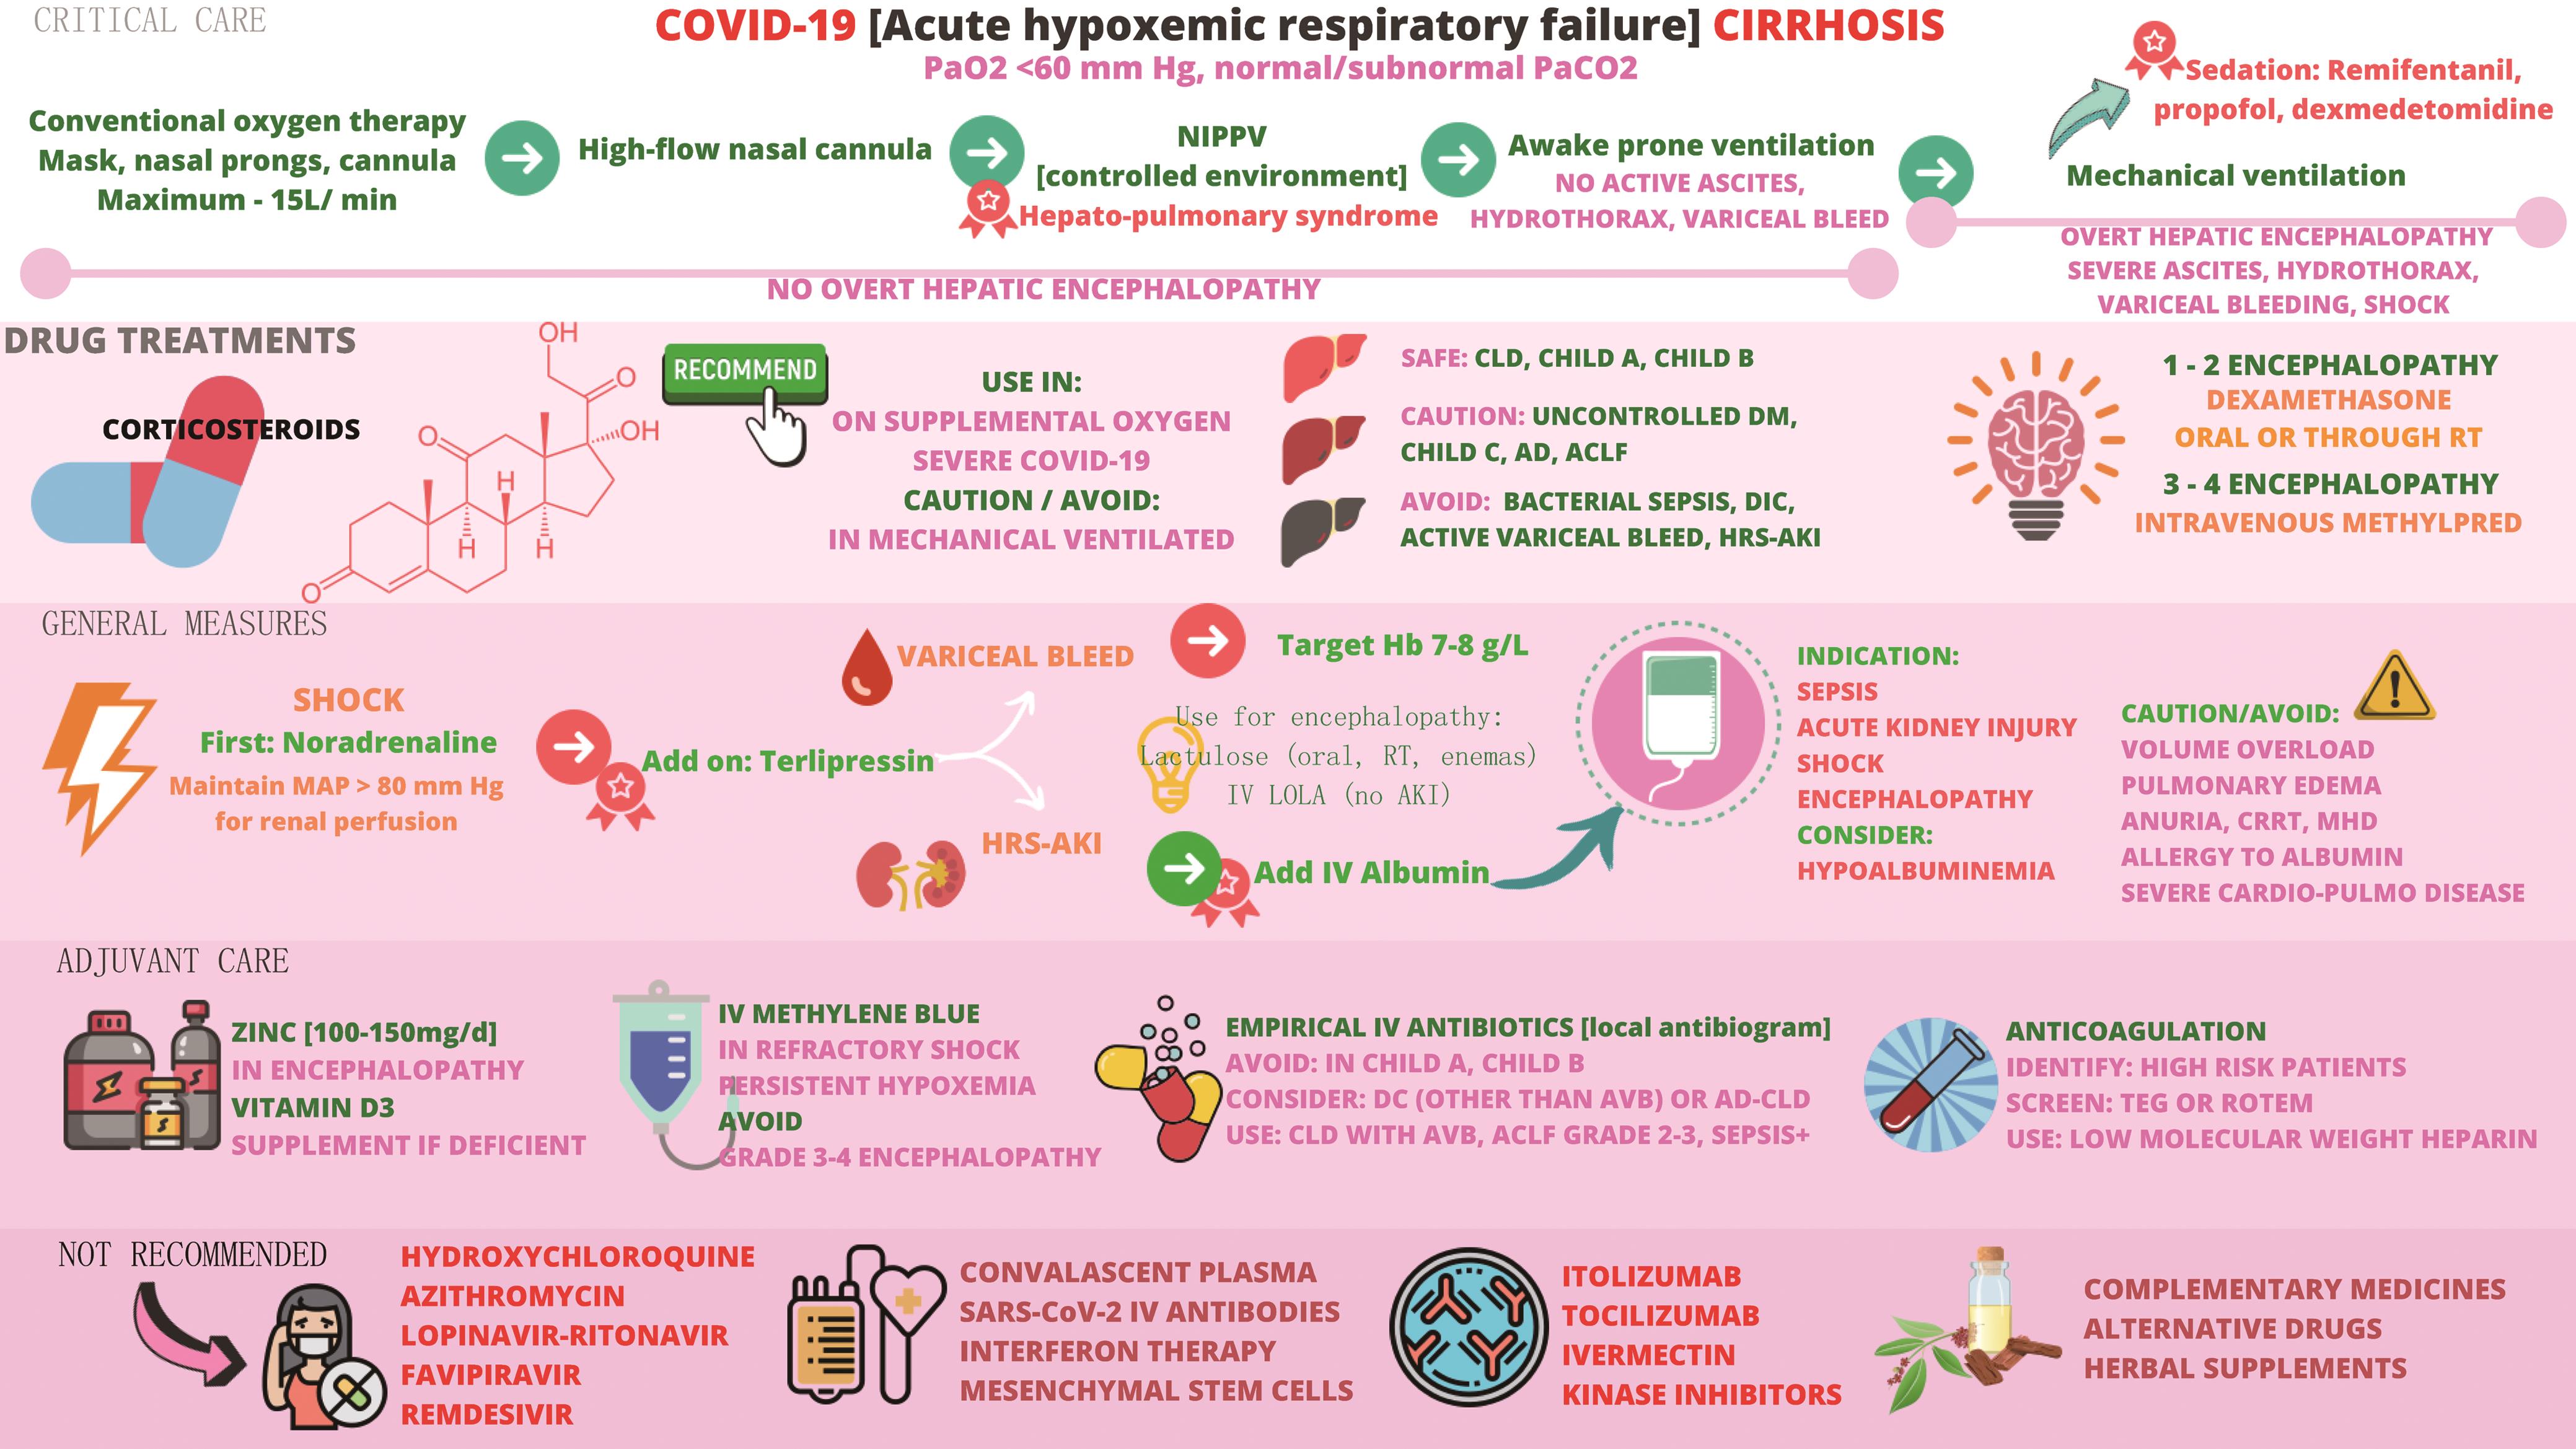 Summary of proposed management of COVID-19 in patients with cirrhosis.